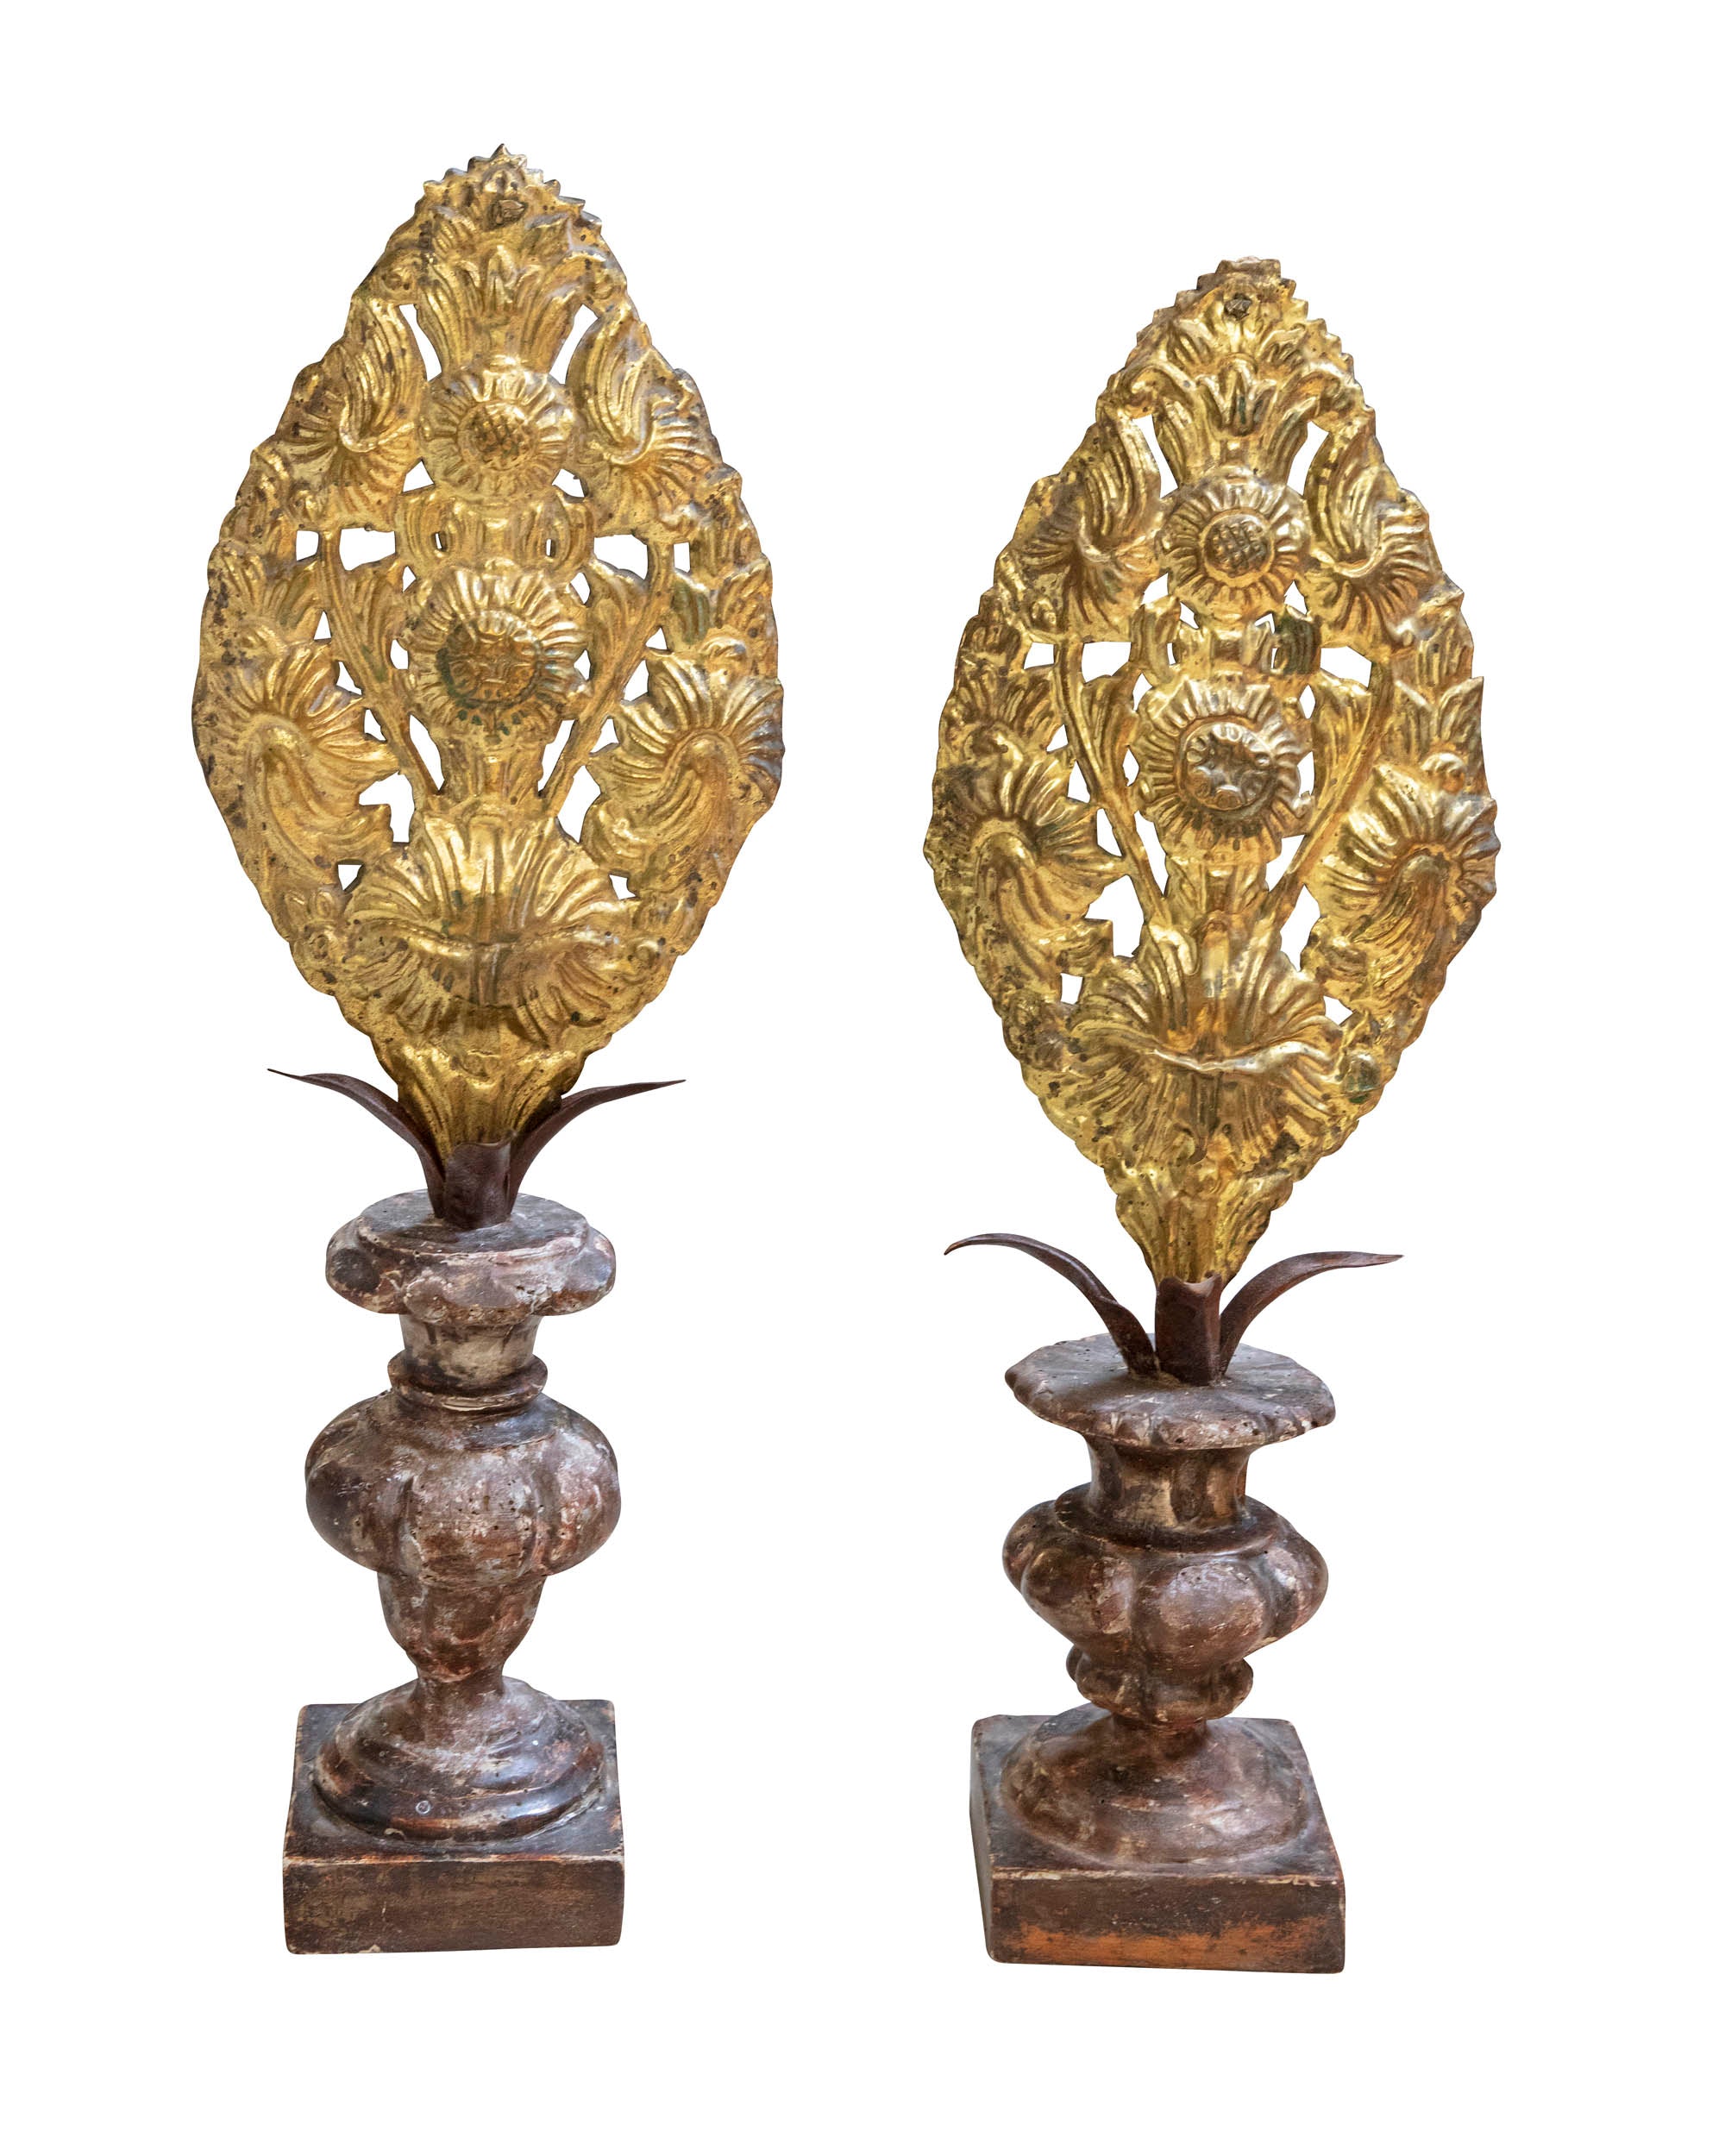 Pair of Italian votive offerings in trimmed gold plate and polychrome wood base. Late XVIIIth century